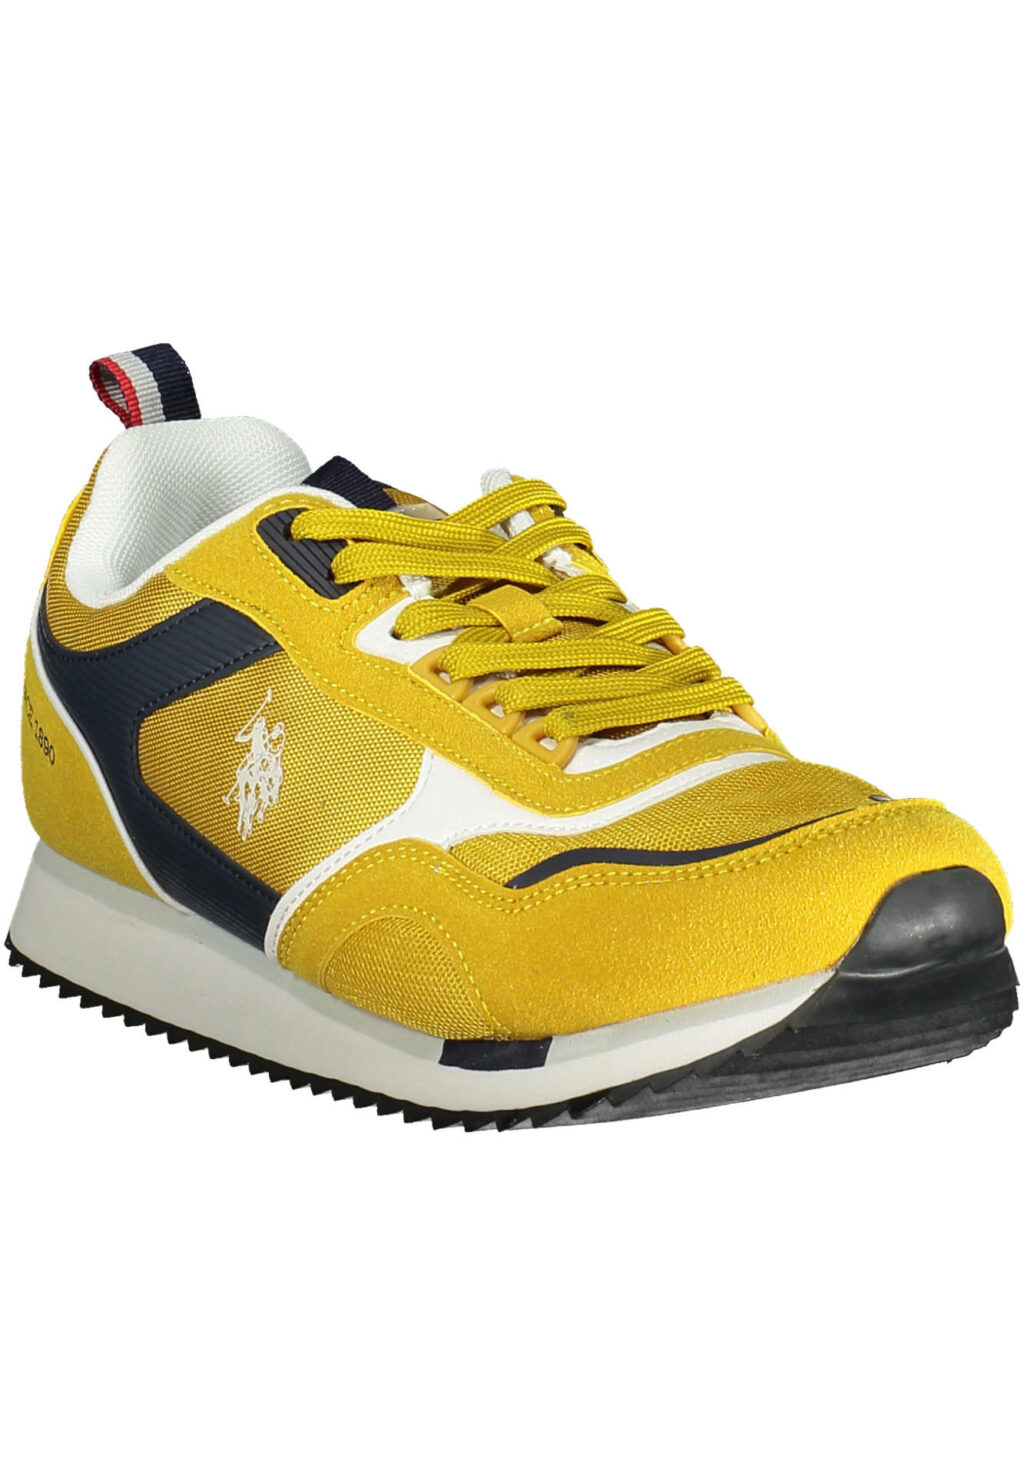 US POLO BEST PRICE YELLOW MAN SPORT SHOES ETHAN001M3TH1_GIALLO_YEL-DBL02